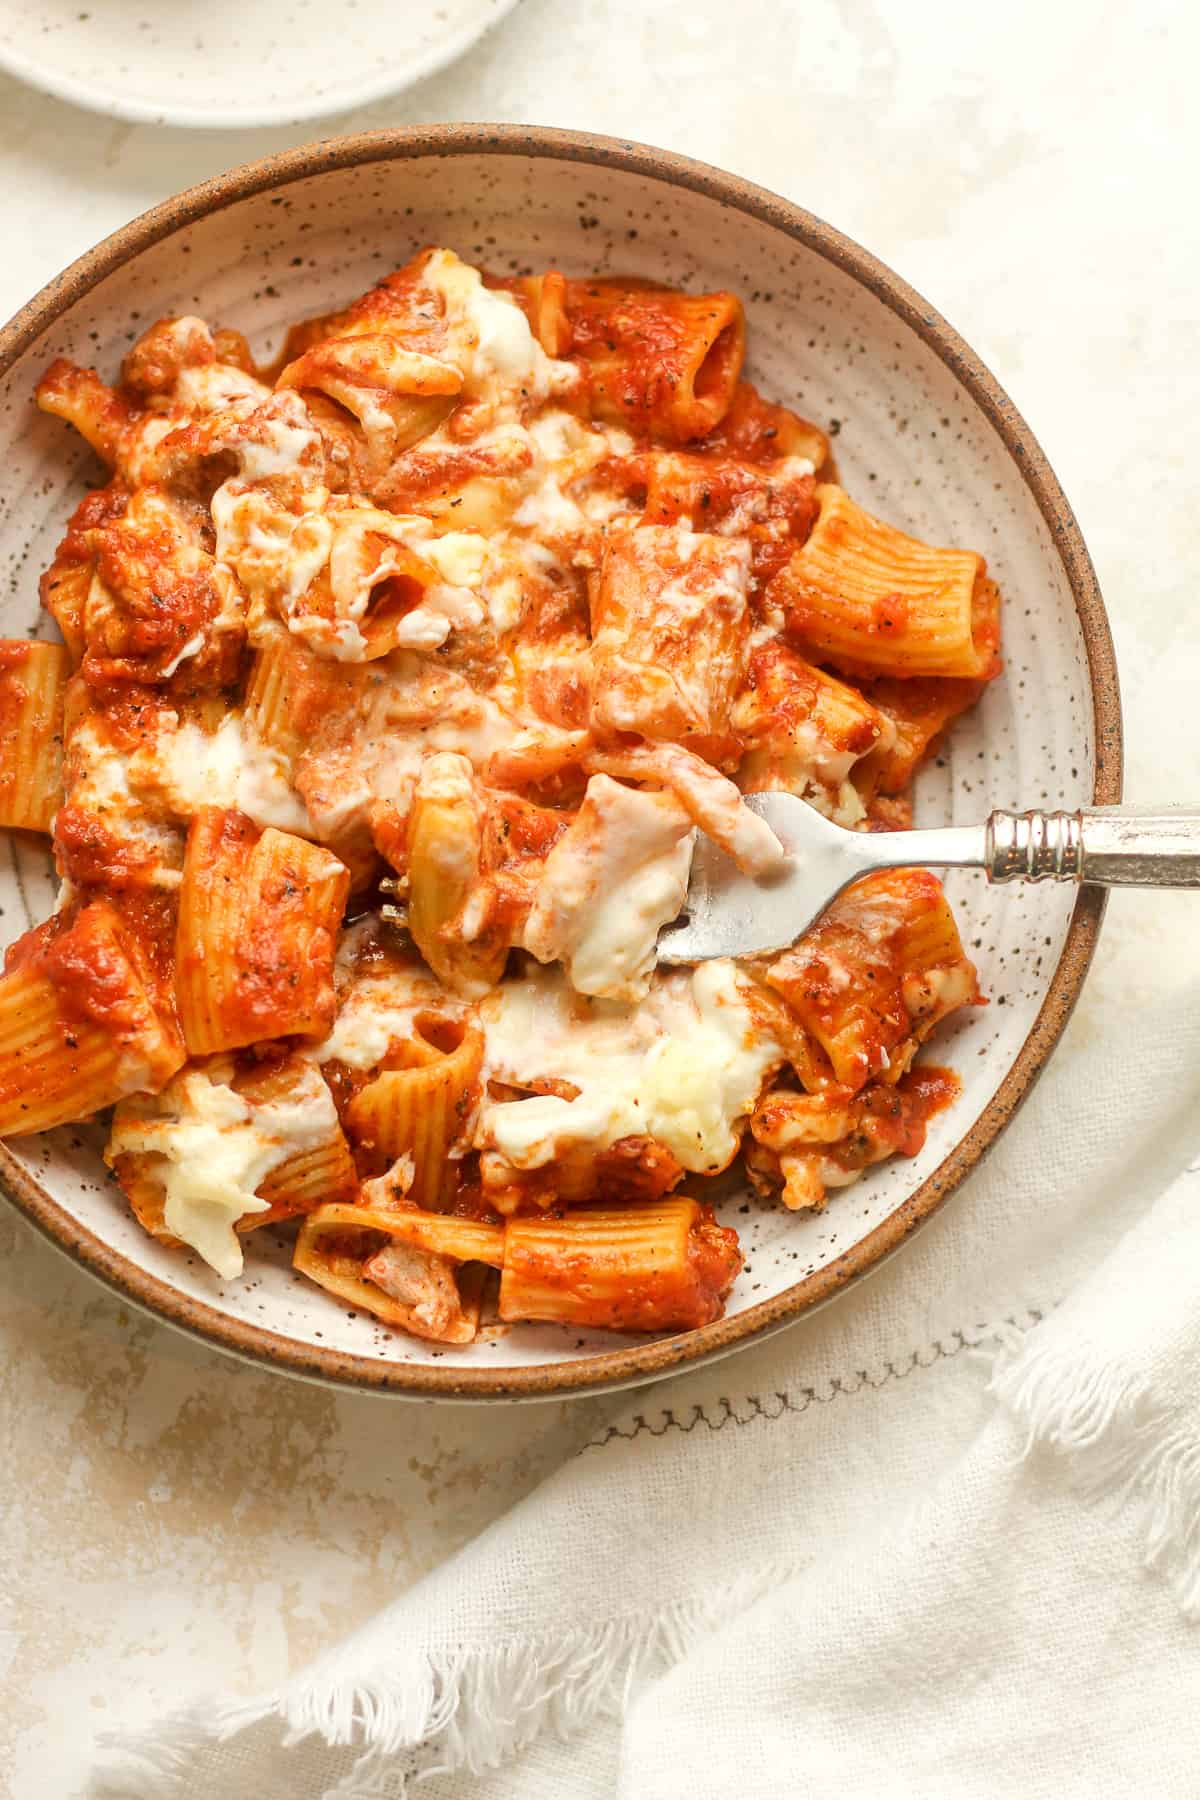 Closeup on a bowl of rigatoni pasta with red sauce.